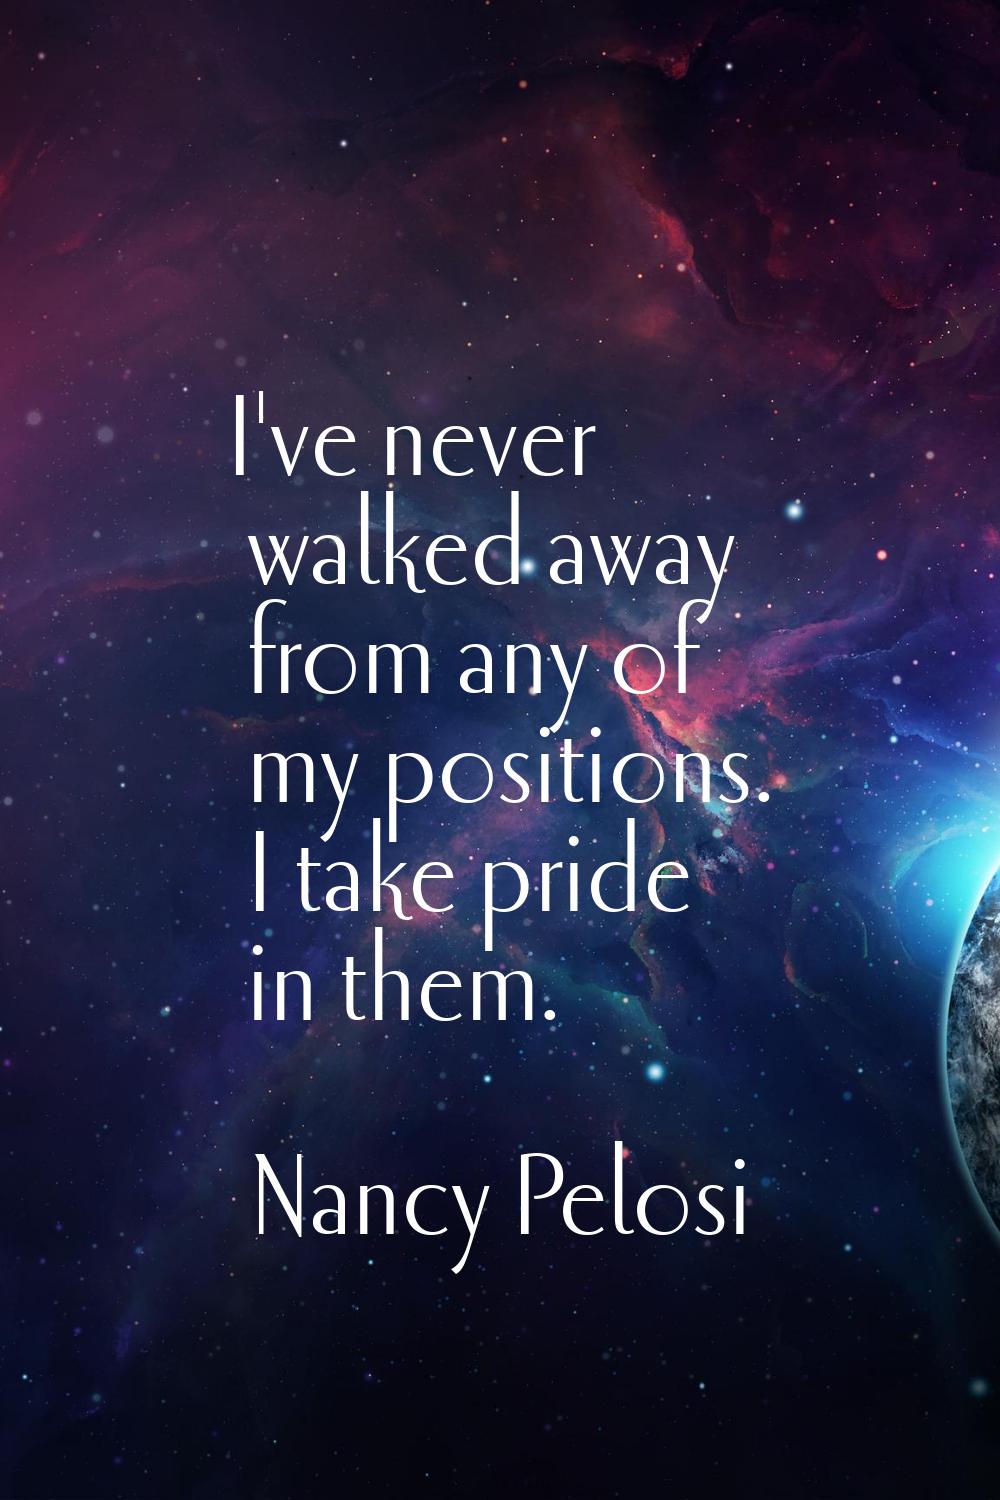 I've never walked away from any of my positions. I take pride in them.